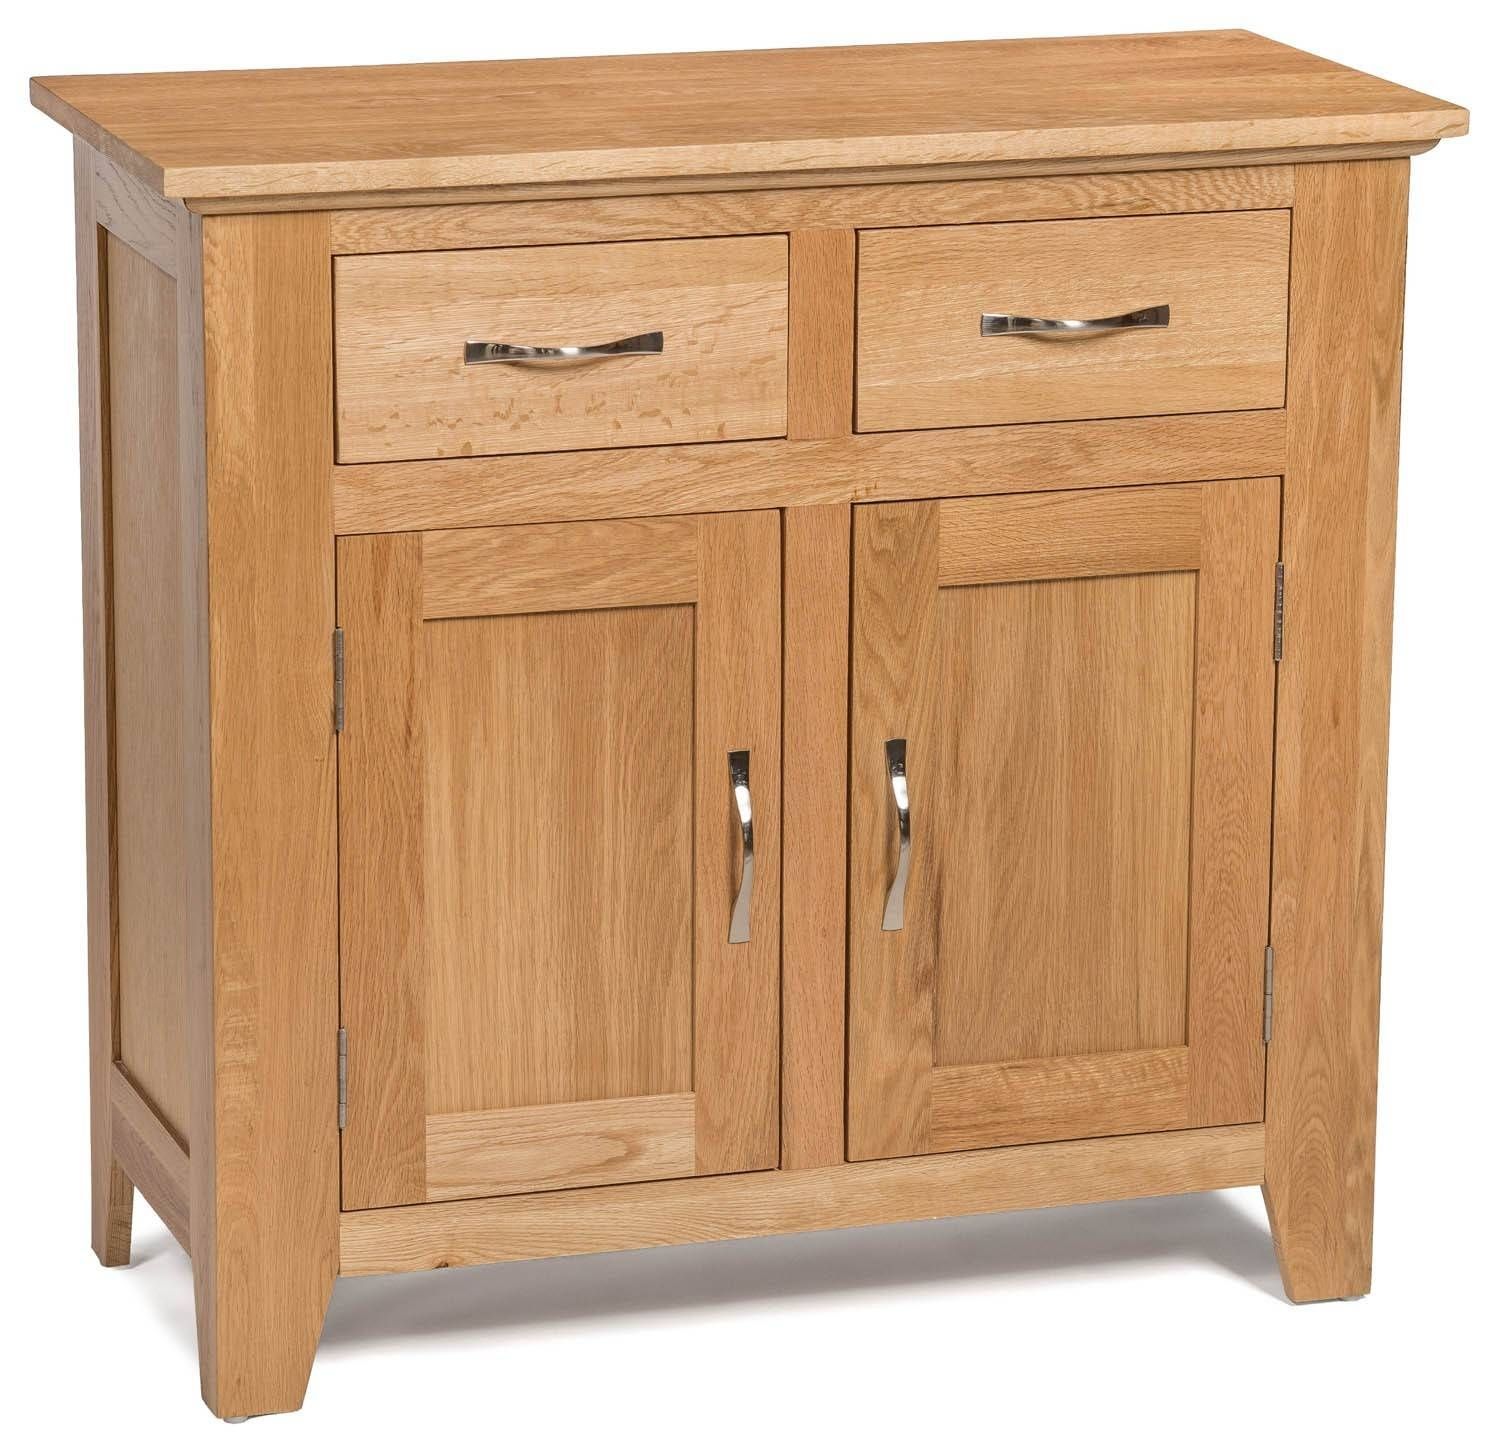 Camberley Oak Small 2 Door 2 Drawer Sideboard – Sideboards & Tops With Regard To Small Sideboards (View 16 of 20)